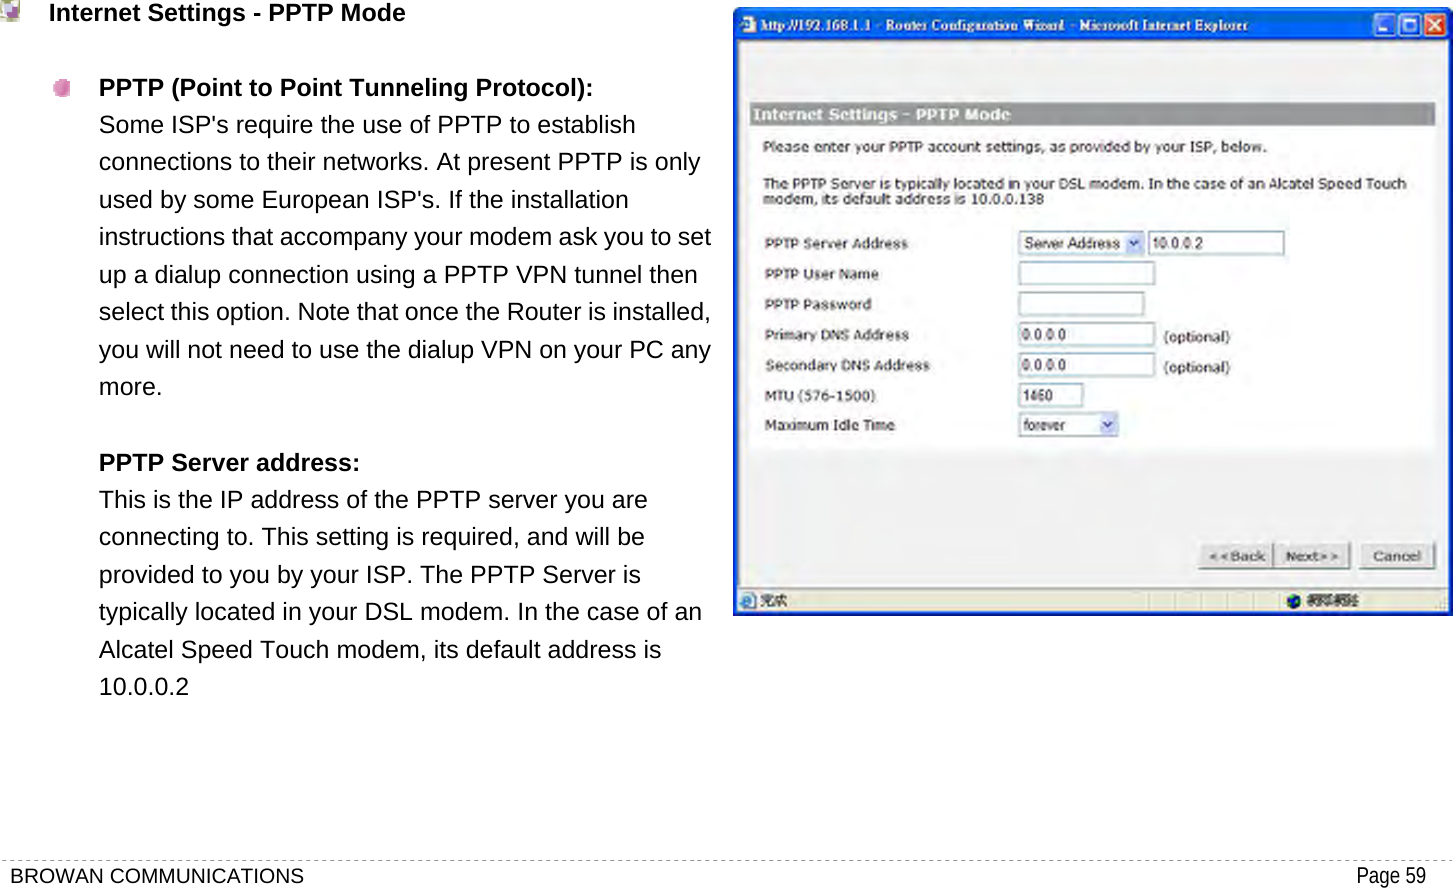 BROWAN COMMUNICATIONS                                                                                           Page 59    Internet Settings - PPTP Mode   PPTP (Point to Point Tunneling Protocol): Some ISP&apos;s require the use of PPTP to establish connections to their networks. At present PPTP is only used by some European ISP&apos;s. If the installation instructions that accompany your modem ask you to set up a dialup connection using a PPTP VPN tunnel then select this option. Note that once the Router is installed, you will not need to use the dialup VPN on your PC any more.  PPTP Server address: This is the IP address of the PPTP server you are connecting to. This setting is required, and will be provided to you by your ISP. The PPTP Server is typically located in your DSL modem. In the case of an Alcatel Speed Touch modem, its default address is 10.0.0.2          